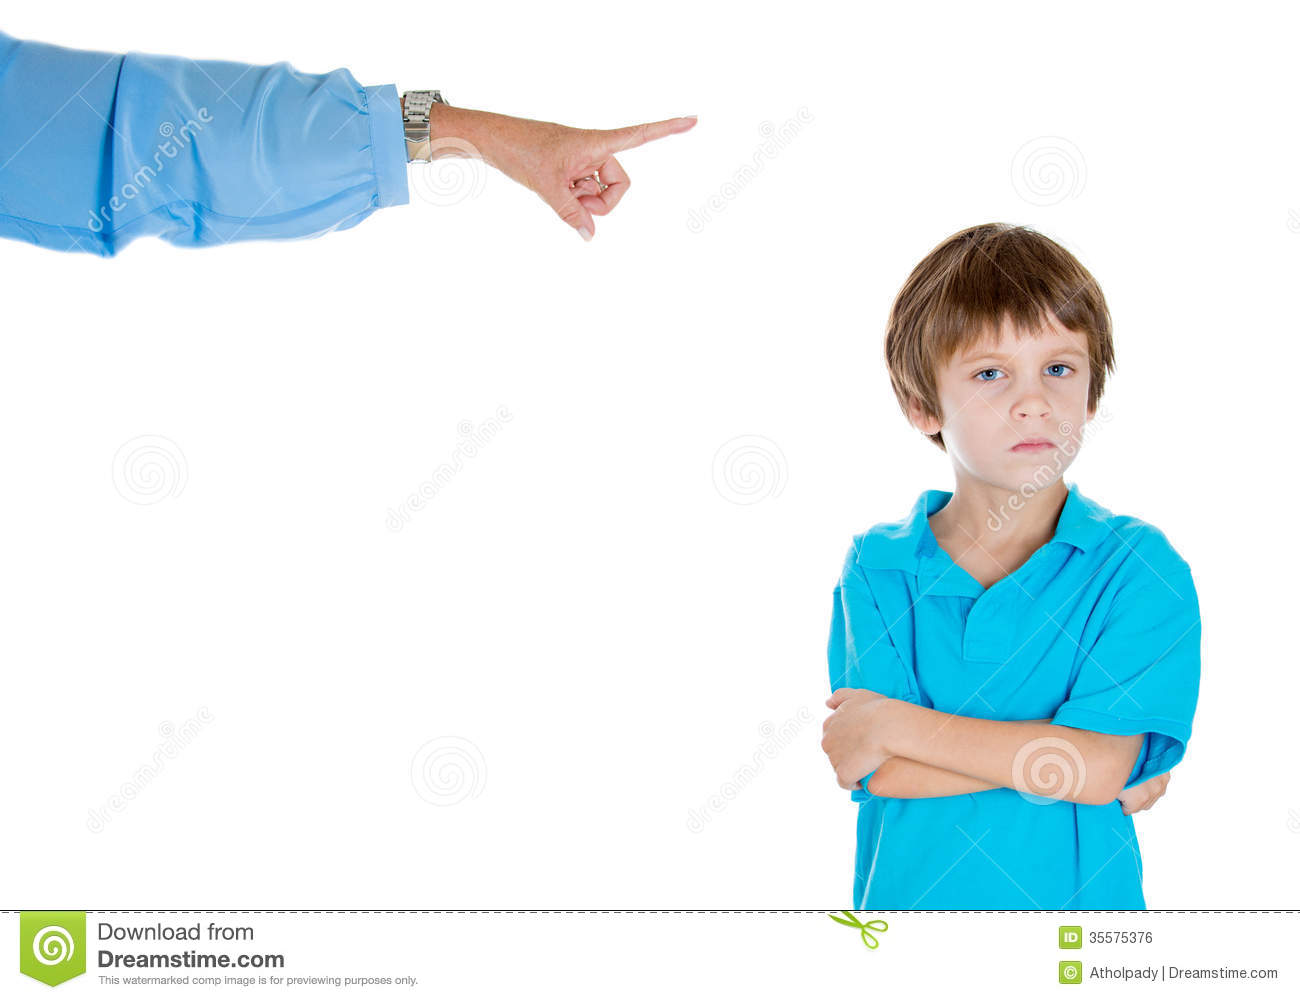 Parent Pointing At A Disobedient Child Royalty Free Stock Image